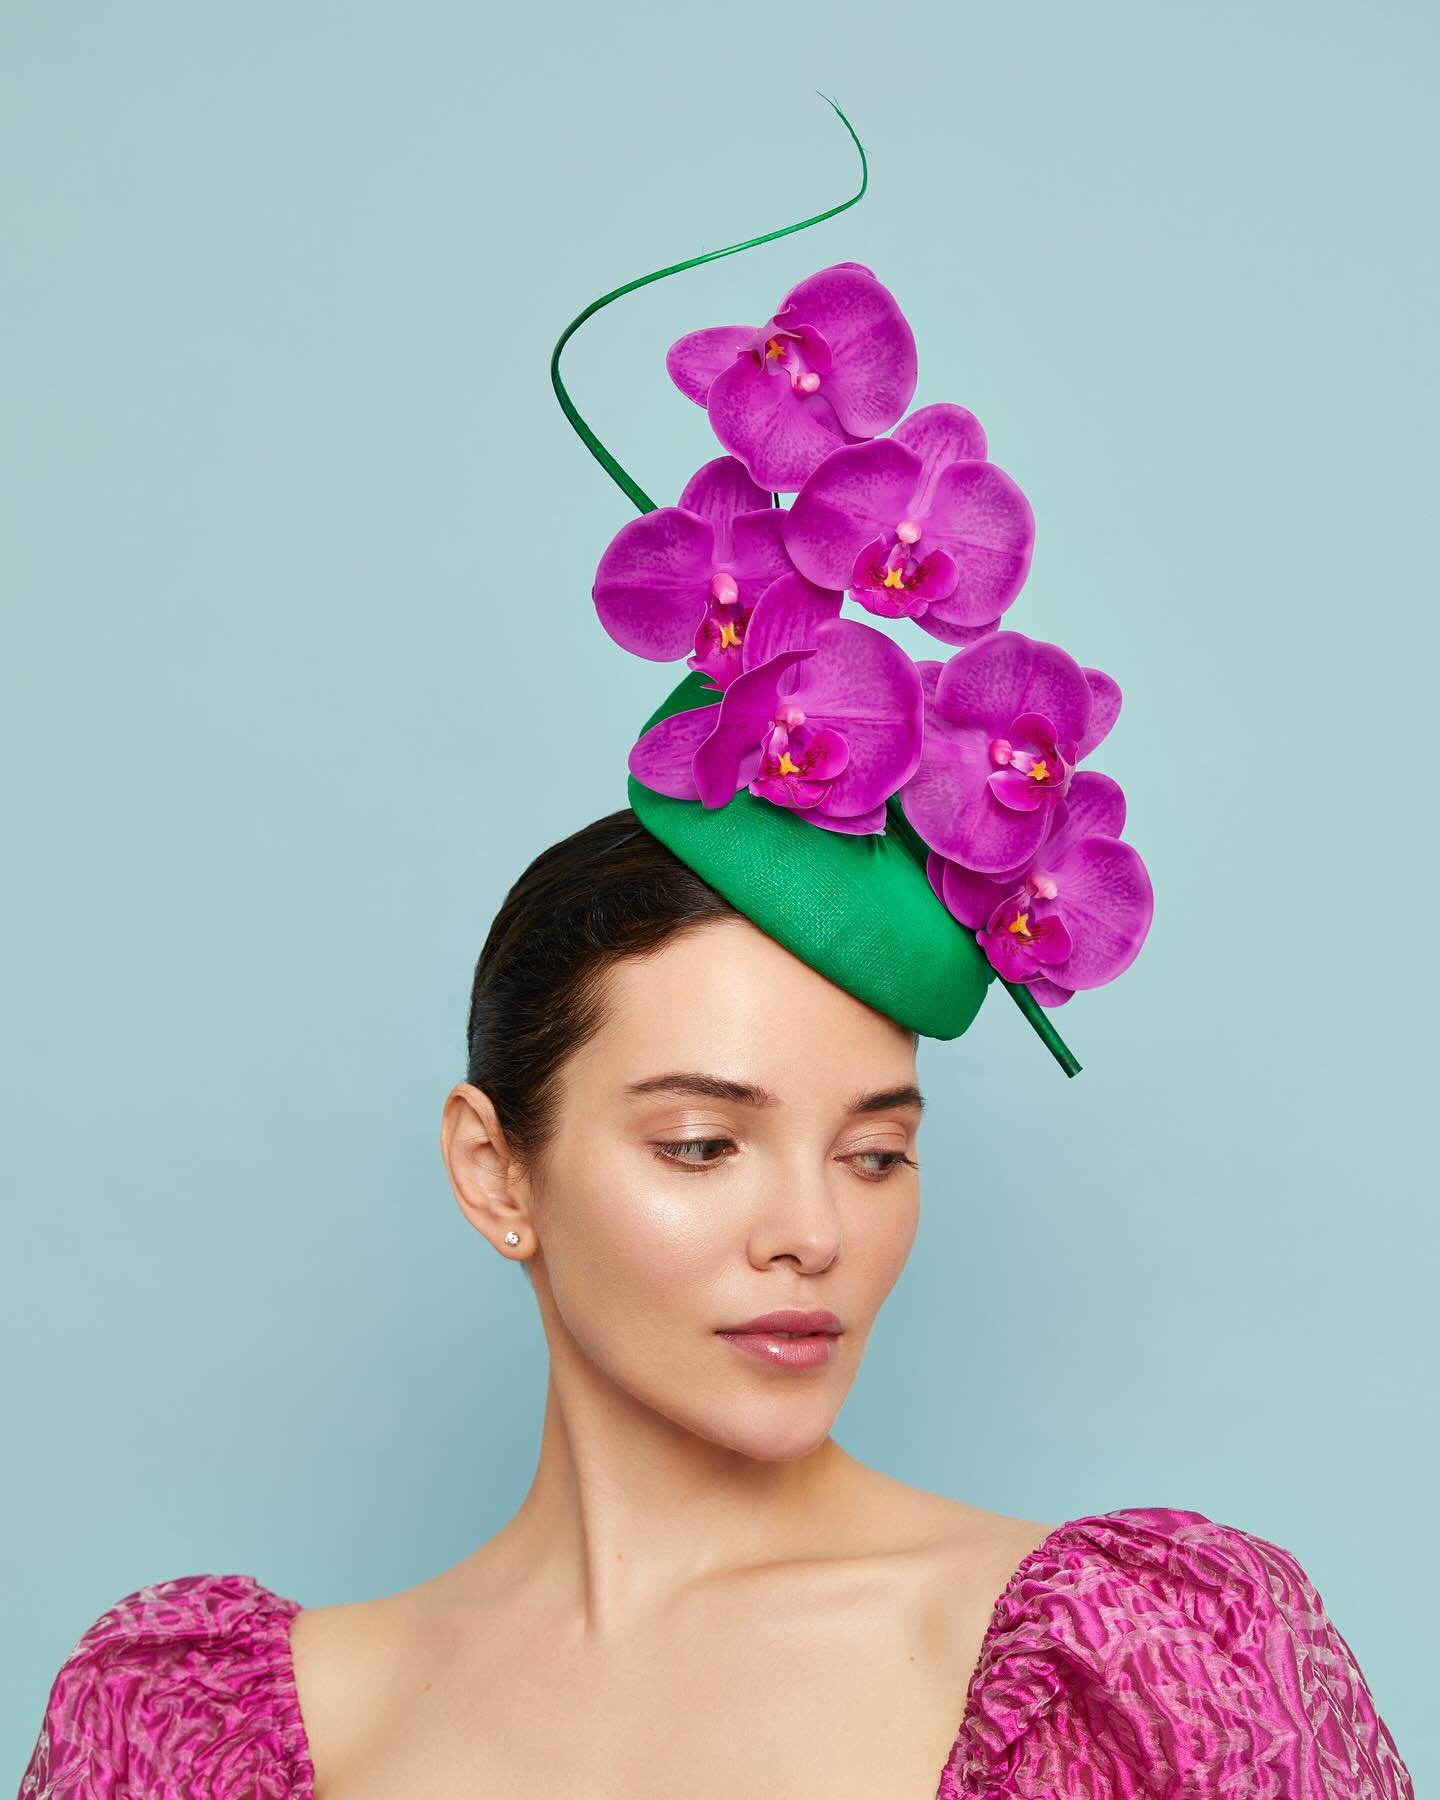 katherineelizabethmillinery New Collection - Sculptural orchid headpiece in a beautiful vibrant pink and emerald green fabric base with a cute bow at the back. 

.
.
.

Photographer@laurenmarshphotography
Makeup artist @anitastevensmua
Model @alena_
